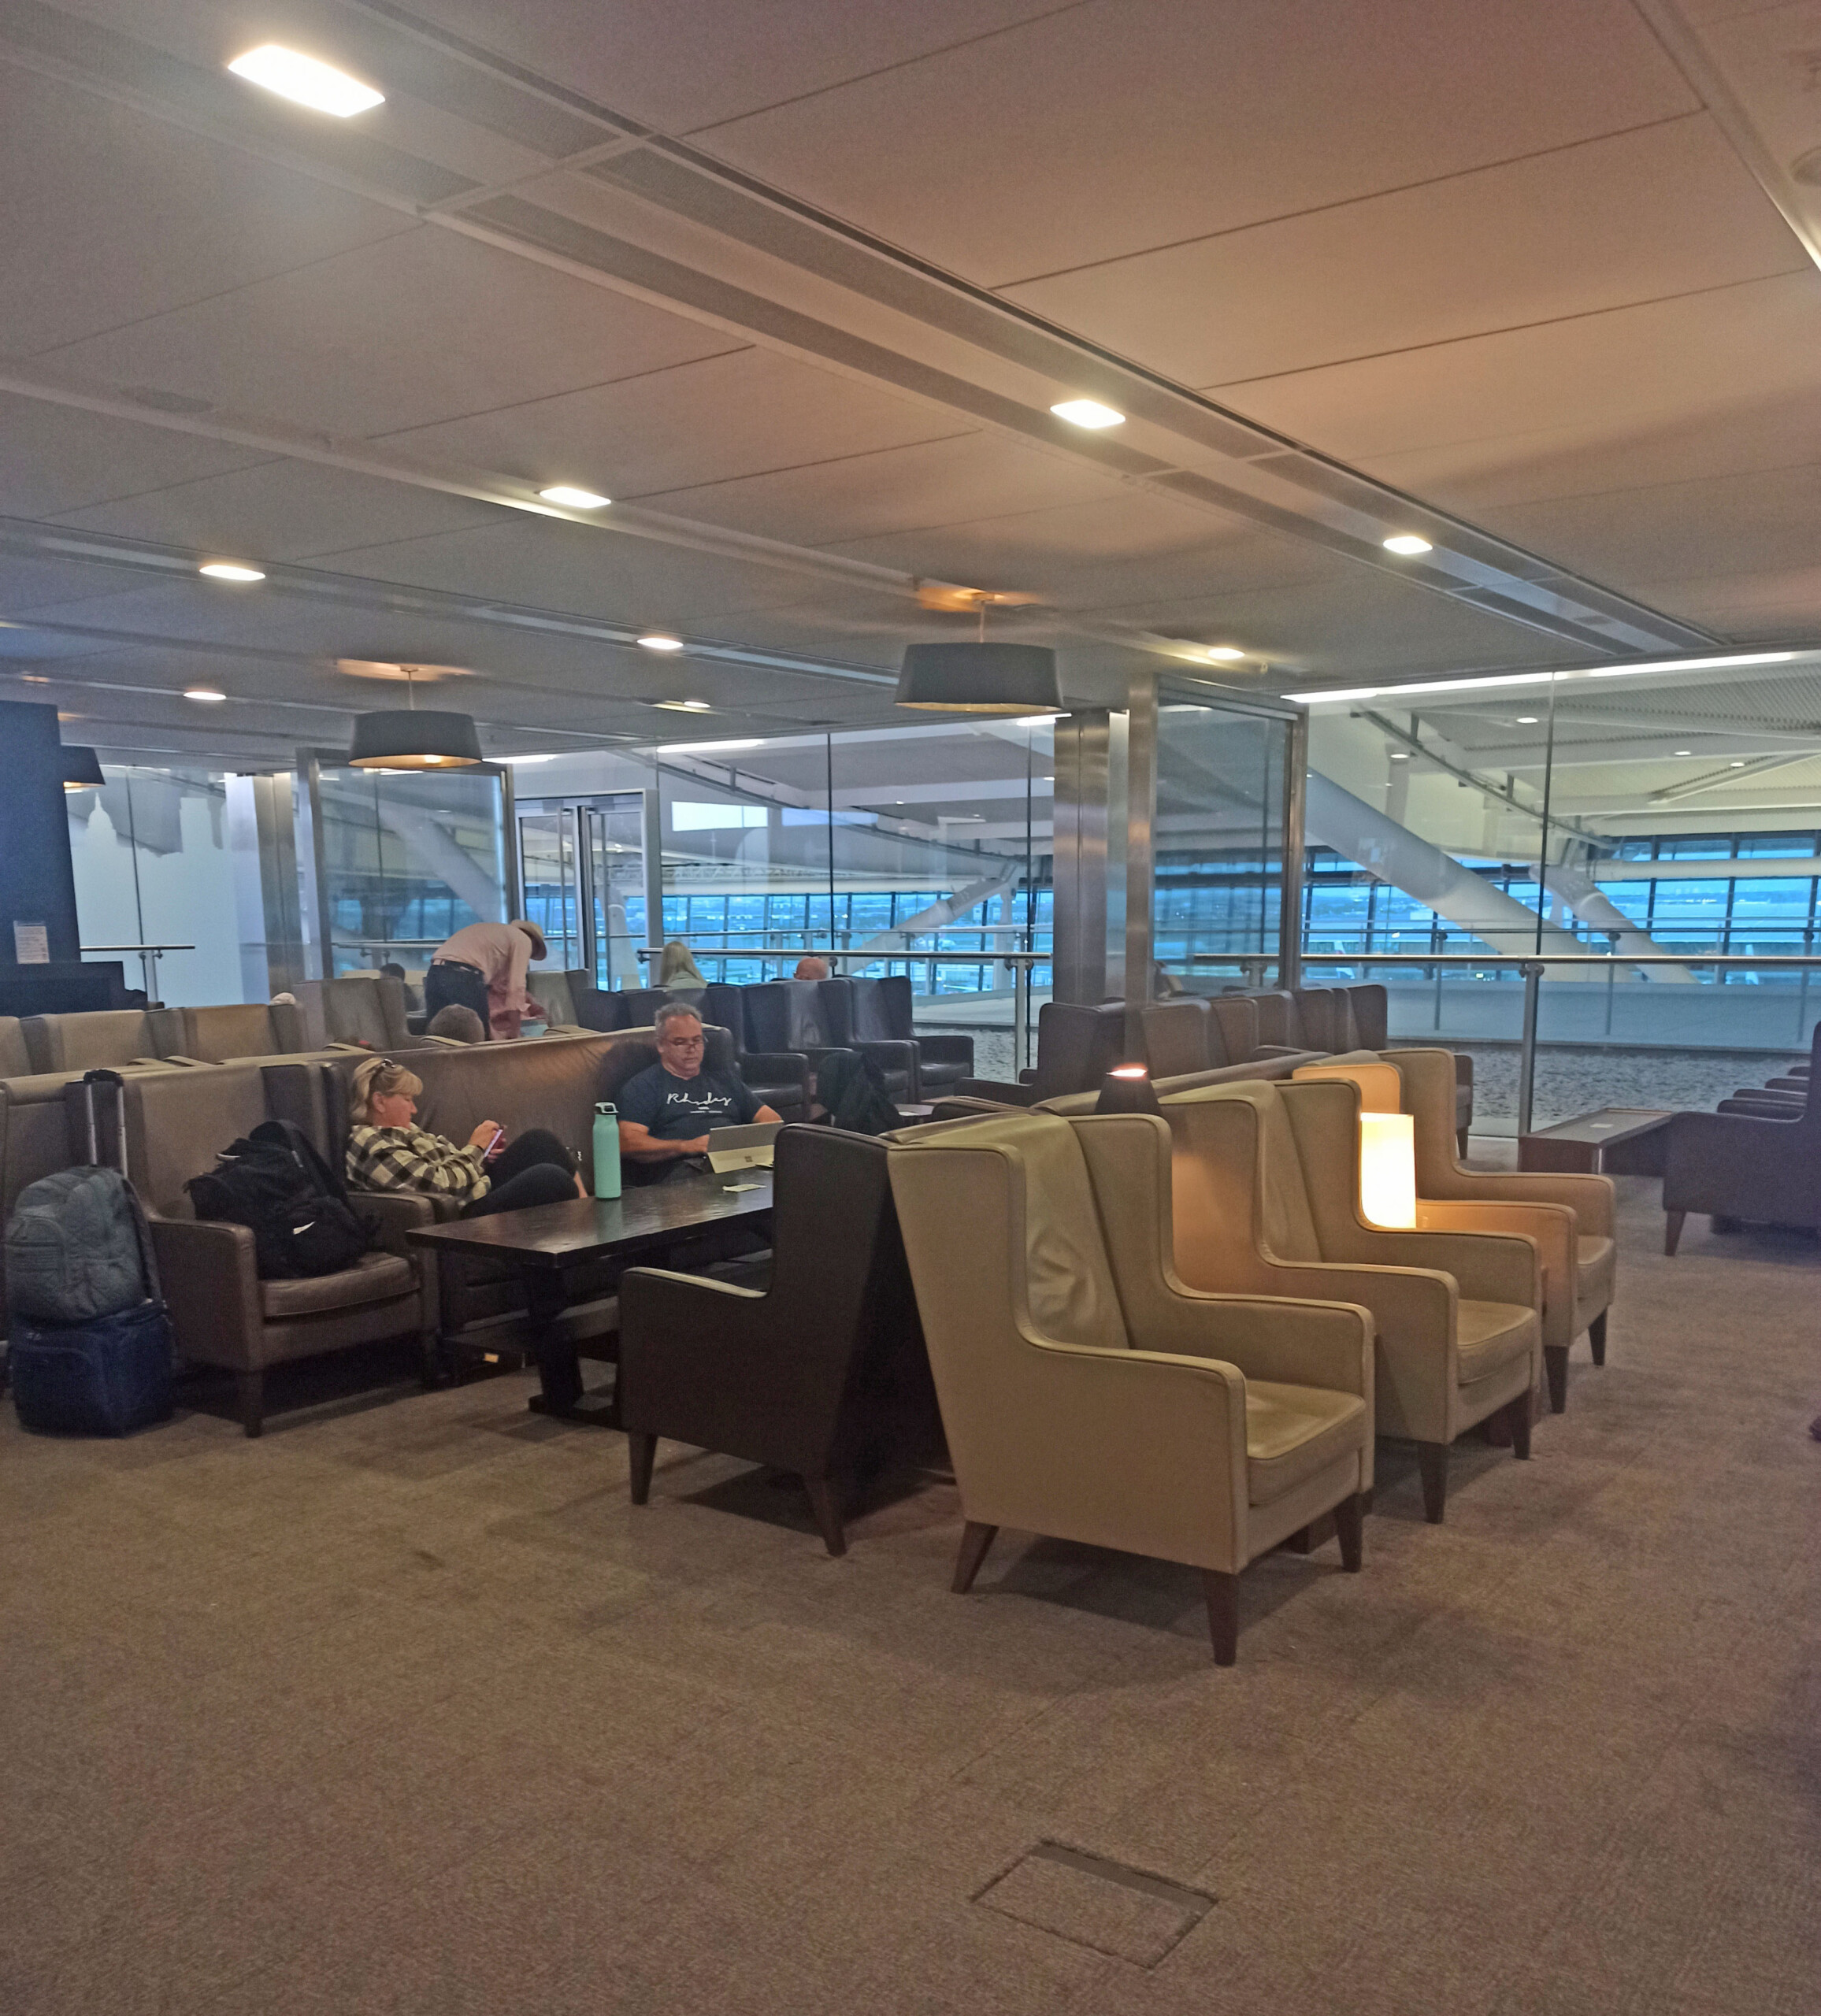 Another Seating Area at the British Airways Club Lounge South